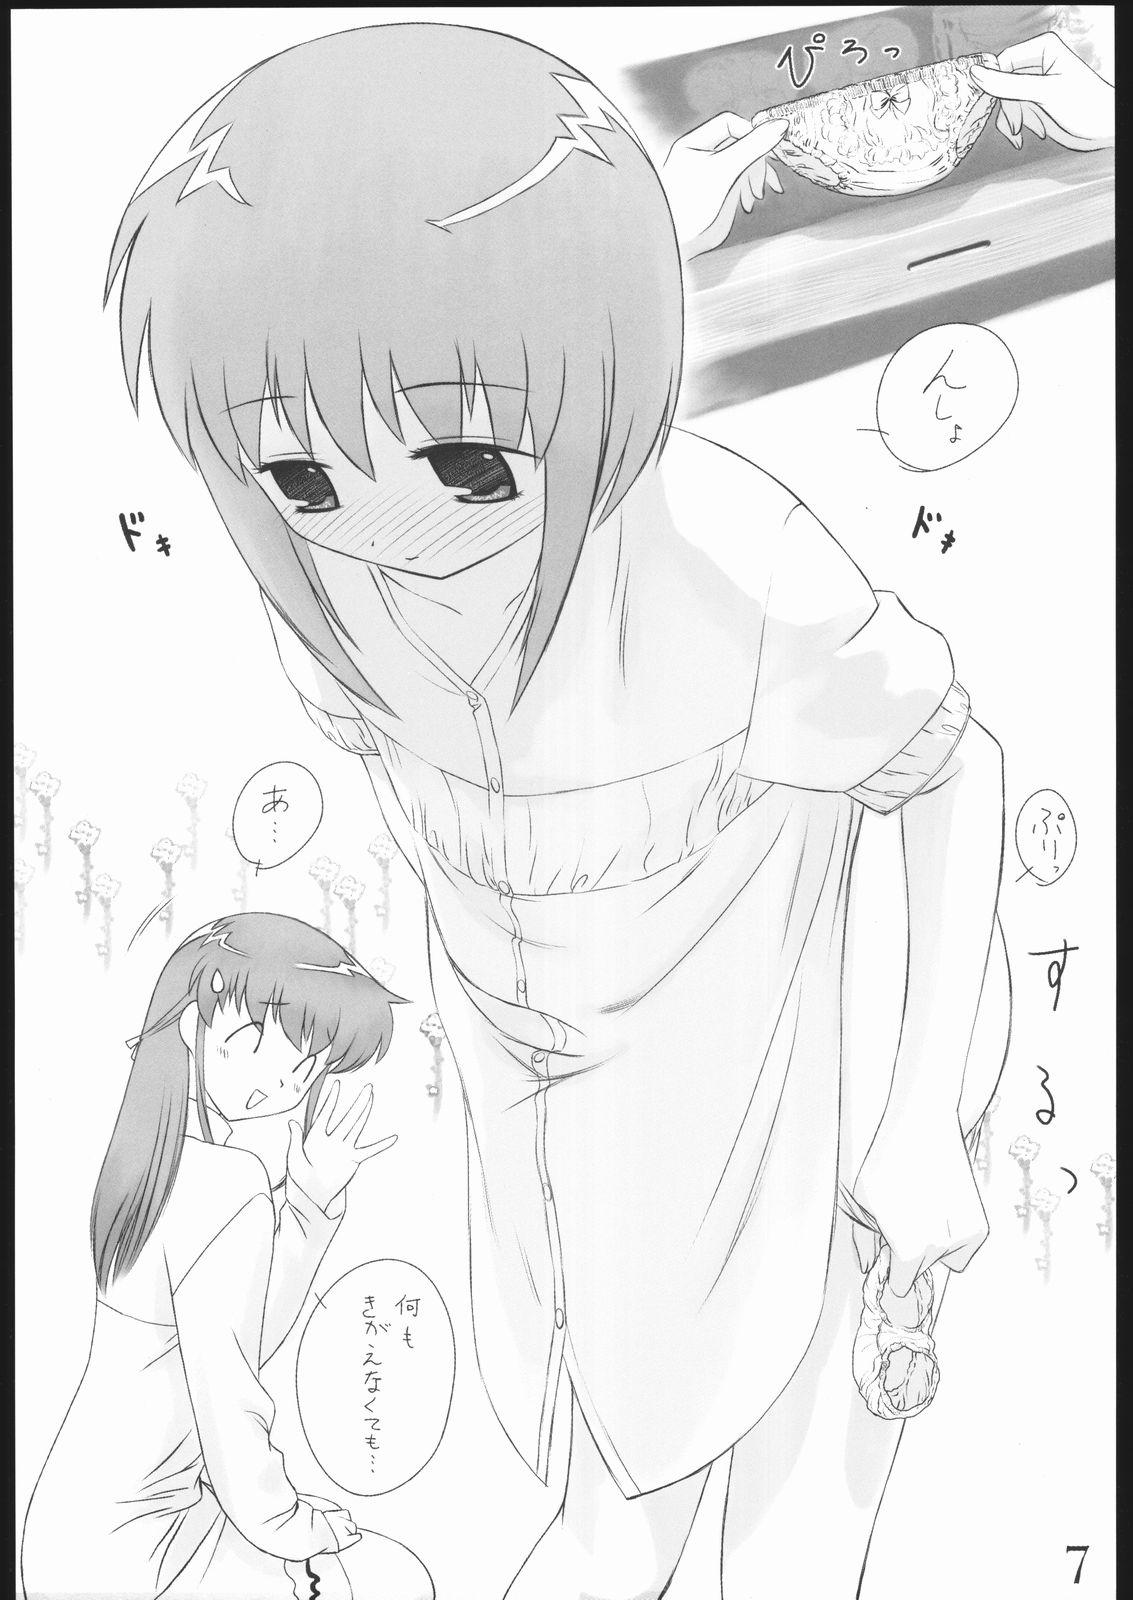 Submission Oneechan Daisuki! 2 - Fruits basket Skinny - Page 6